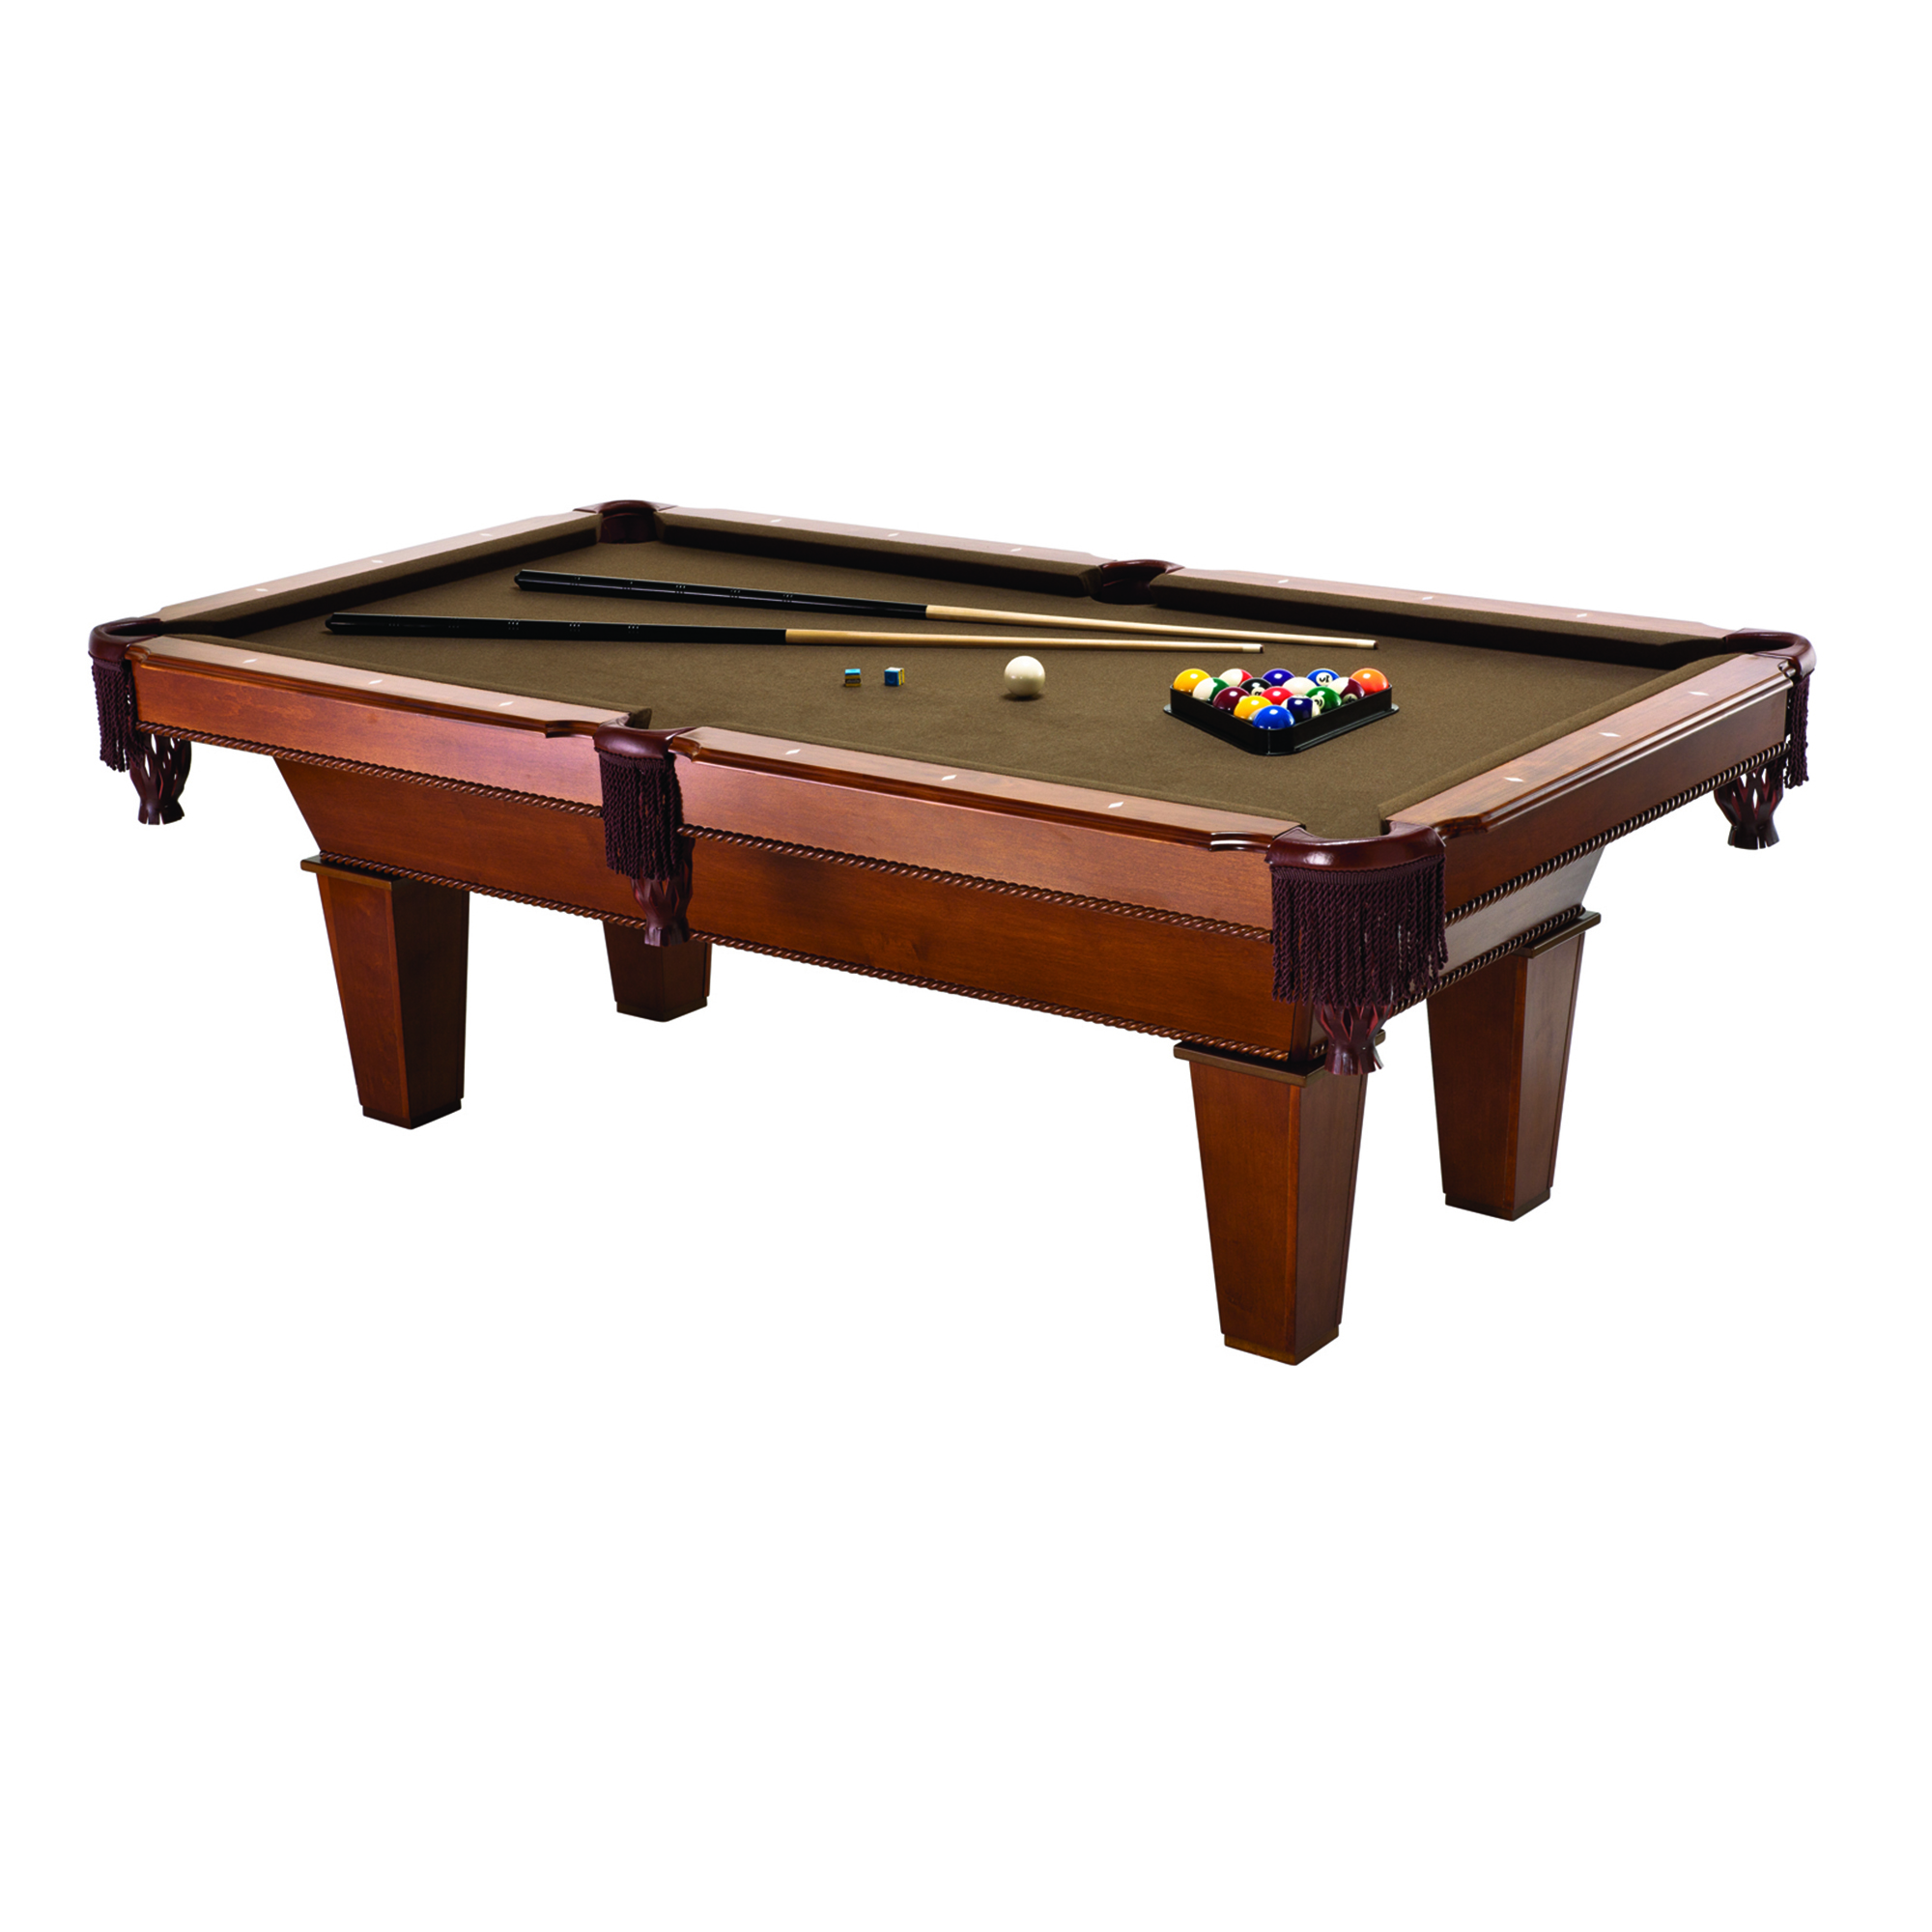 7' Frisco Billiard Table with Play Package